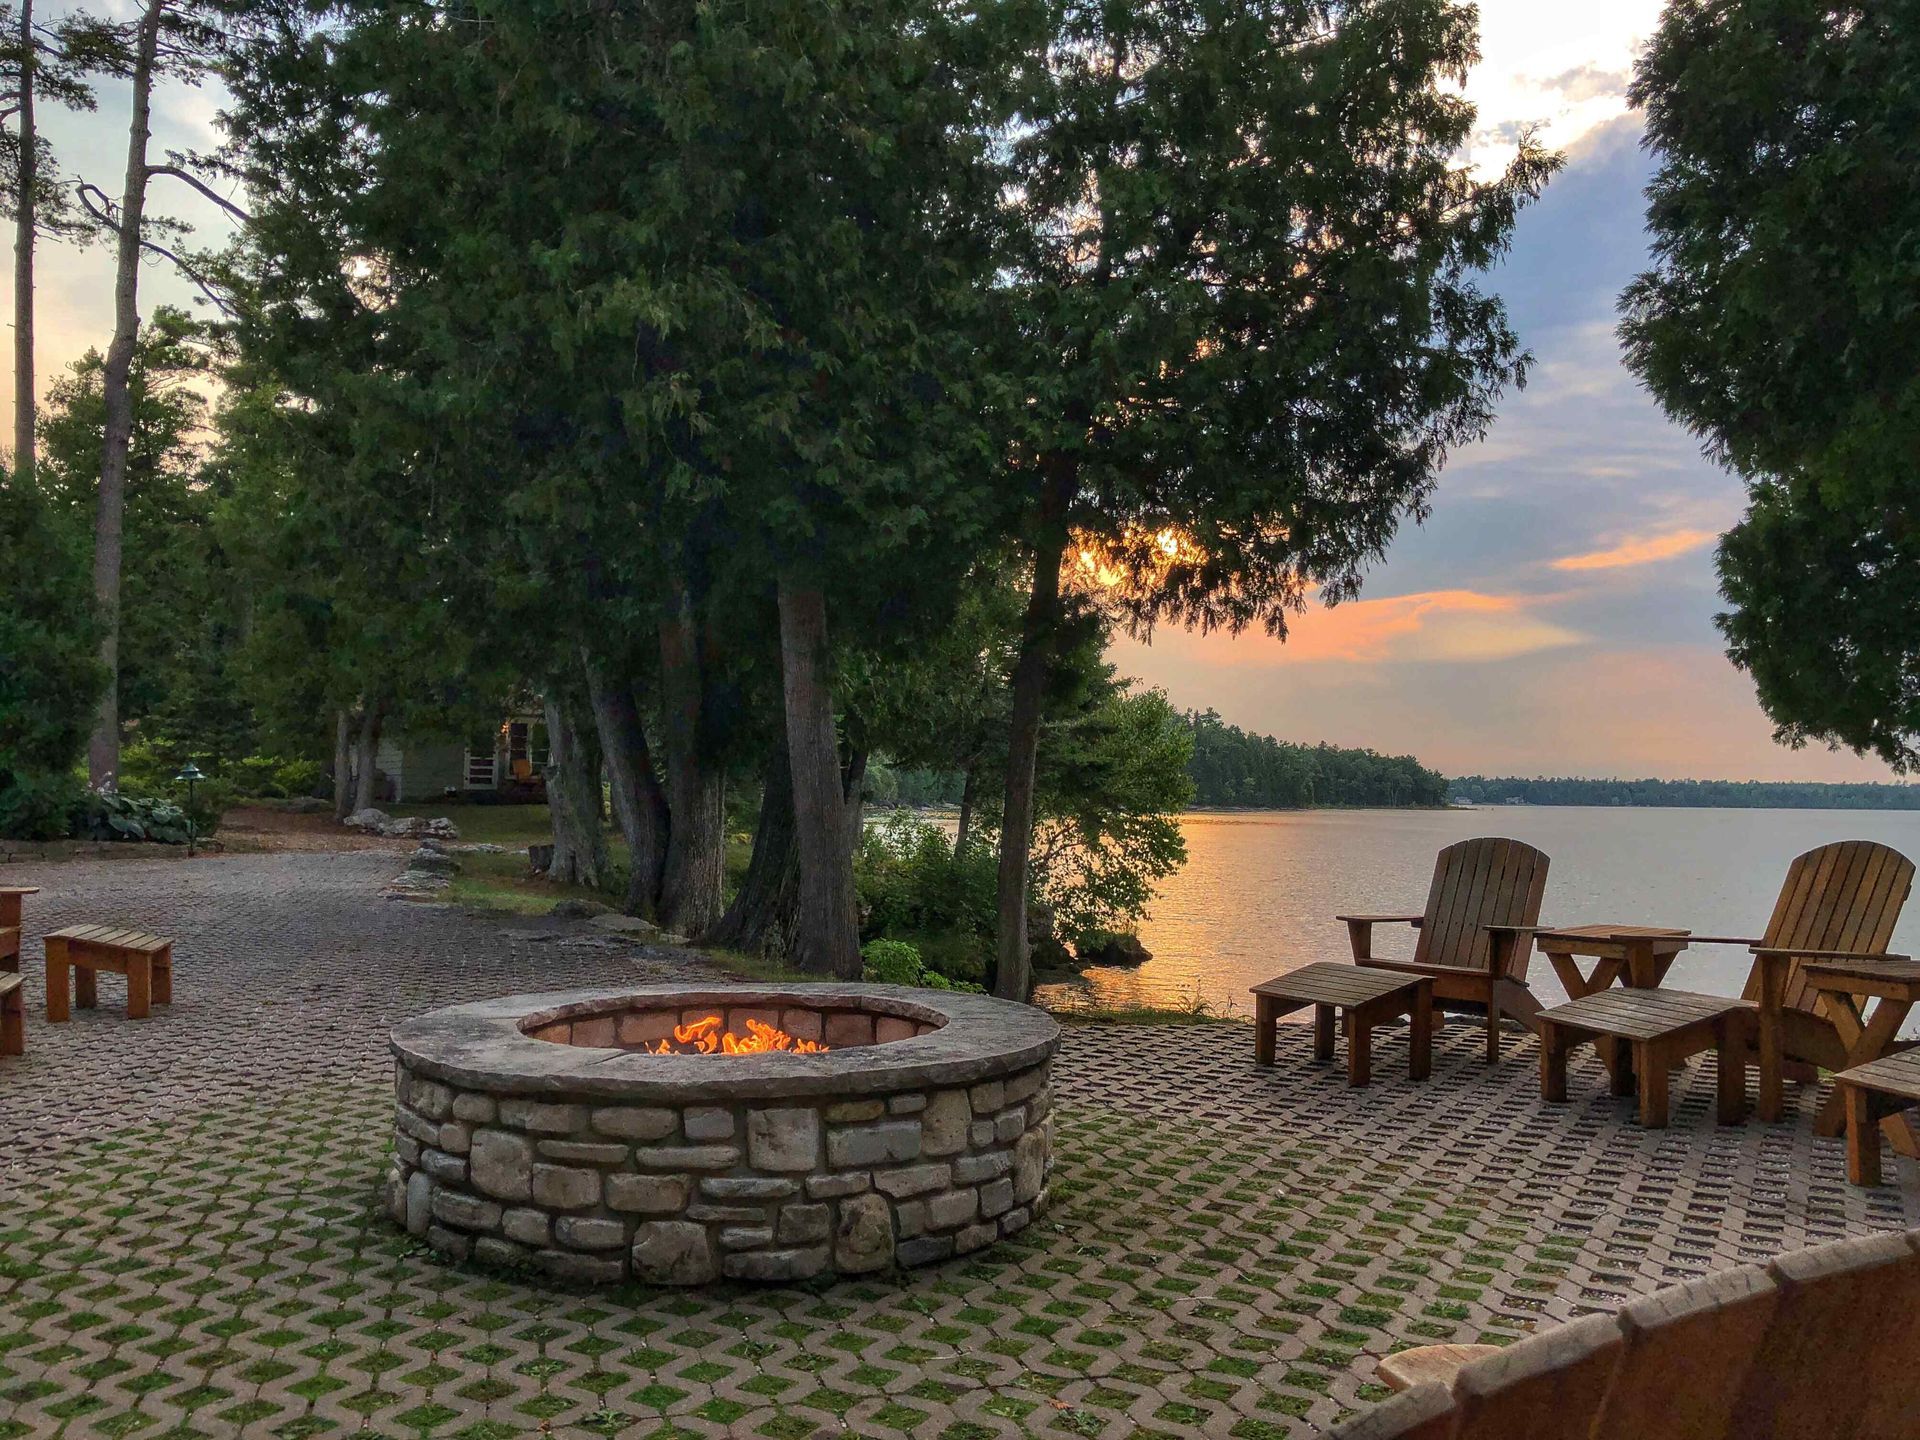 Rounded Fire Pit at Dusk with Lake view